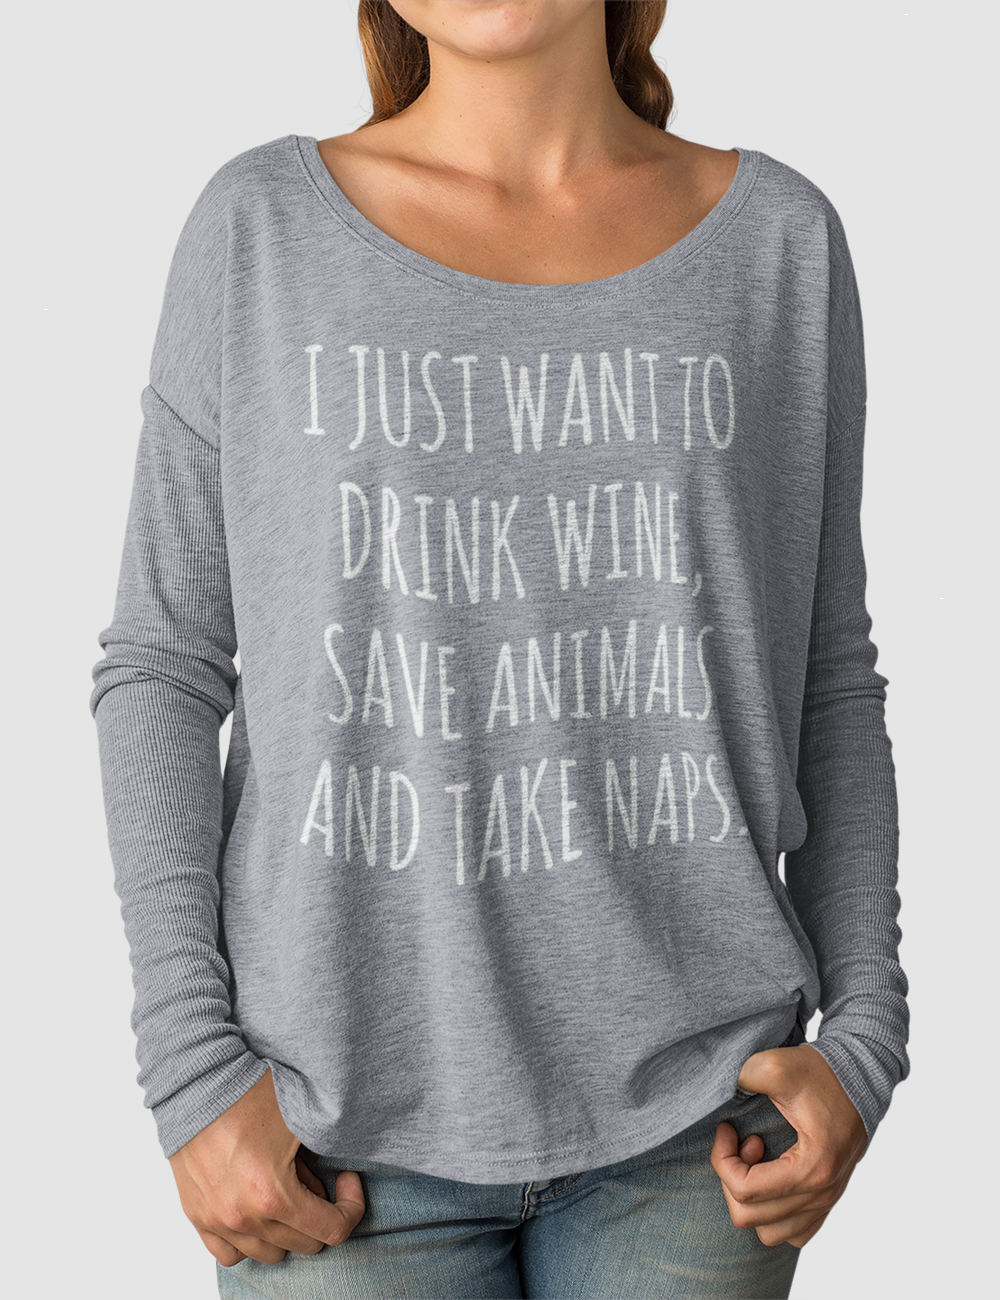 I Just Want To Drink Wine Save Animals And Take Naps | Women's Flowy Long Sleeve Shirt OniTakai